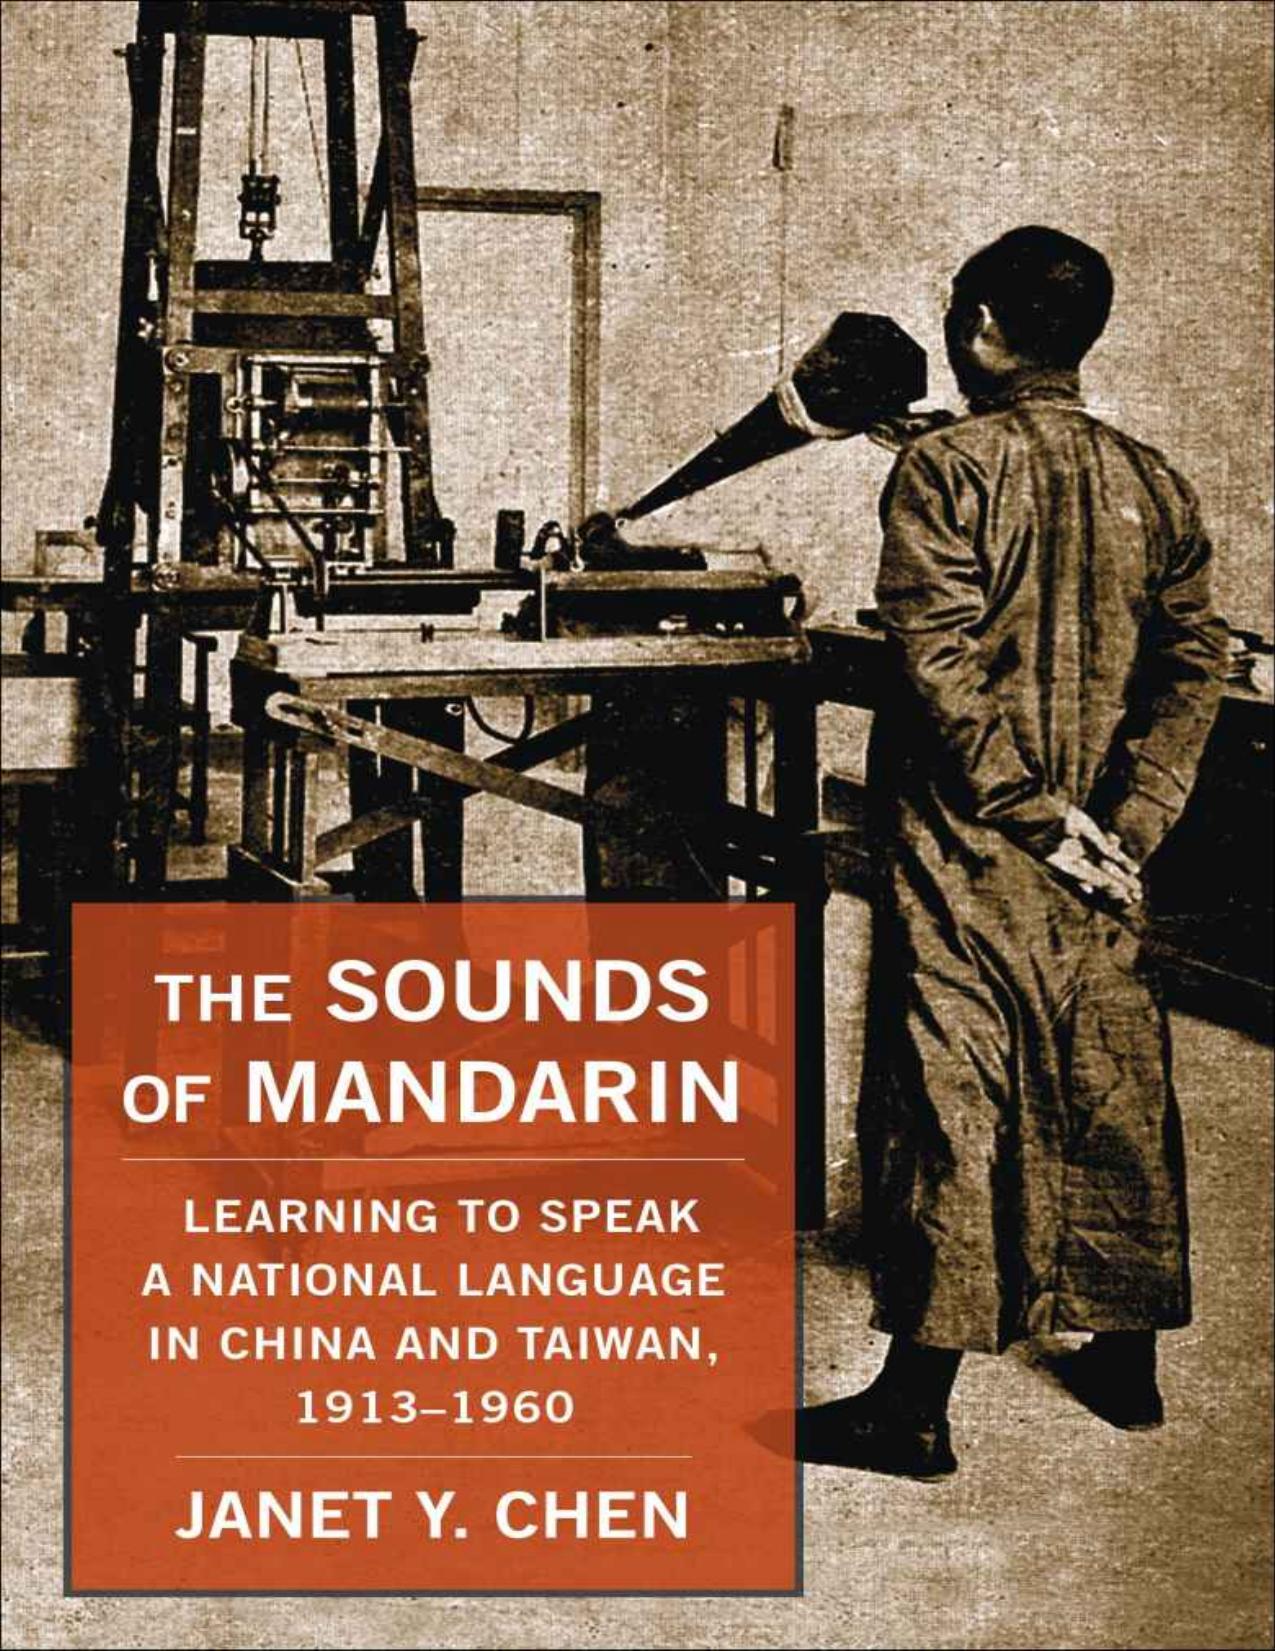 The Sounds of Mandarin: Learning to Speak a National Language in China and Taiwan, 1913-1960 by Janet Y. Chen